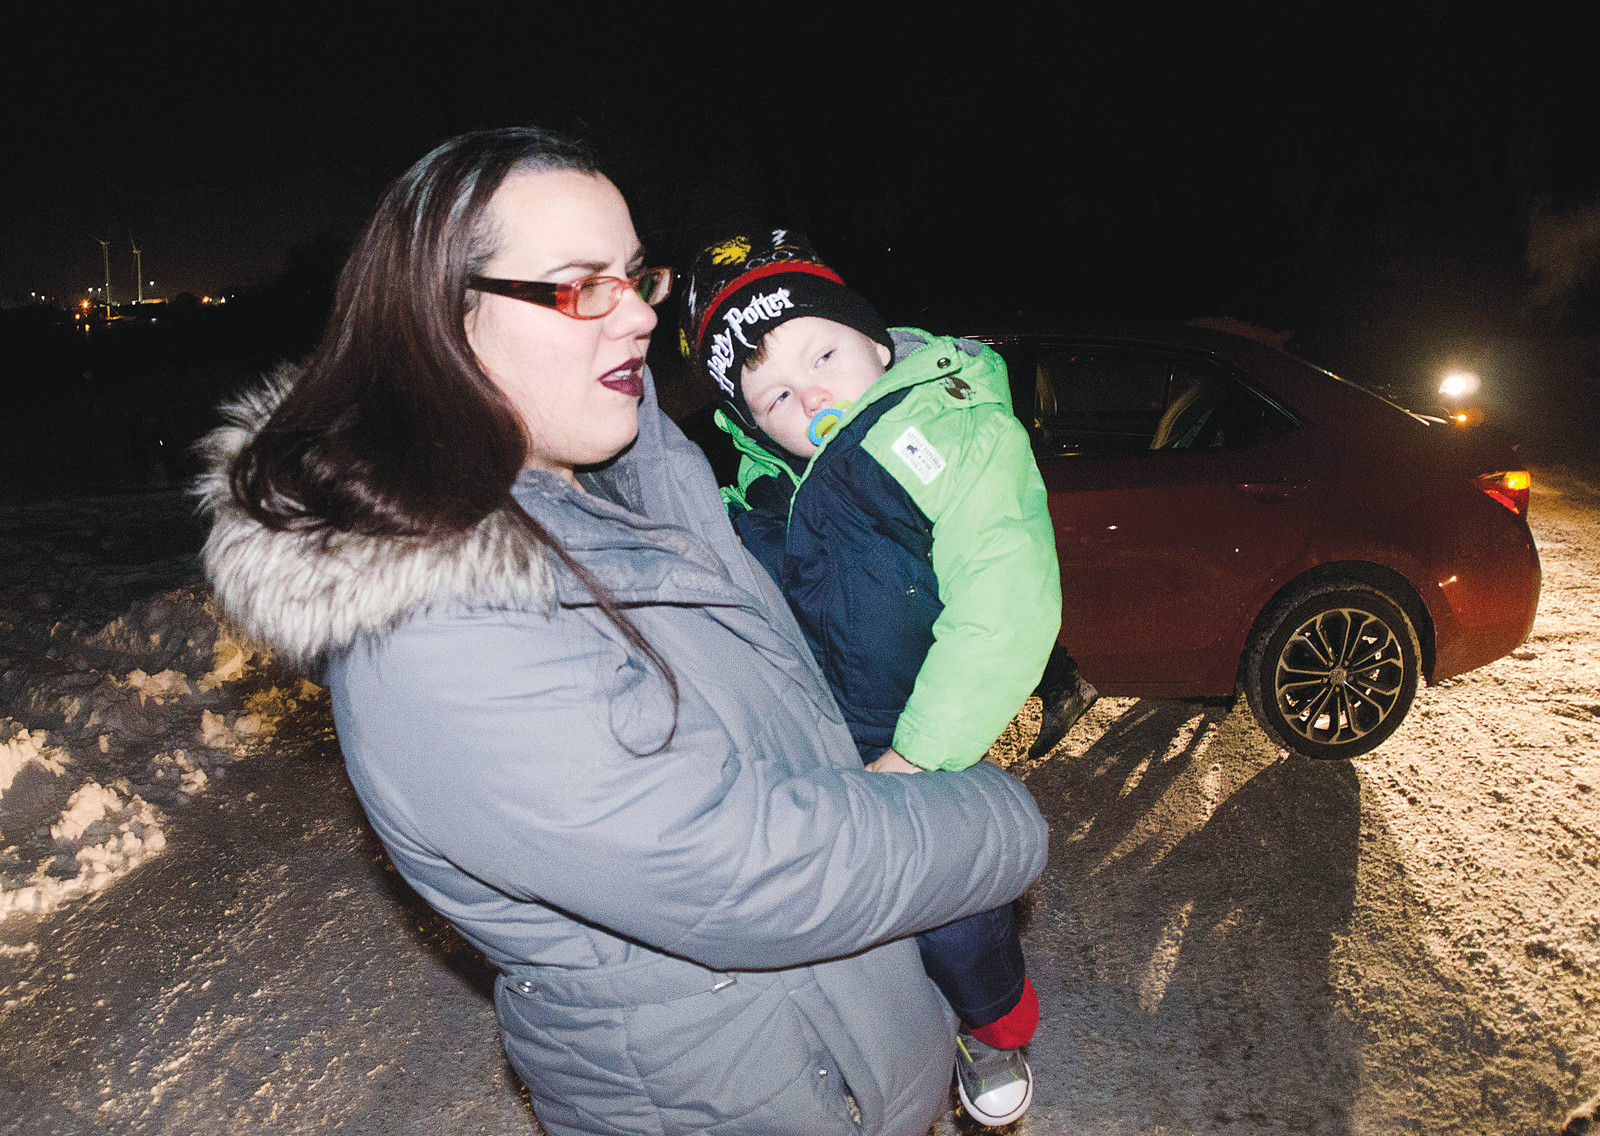 Brit McAdam said the Good Night Lights project helped life the spirits of her son, Jackson, when he was hospitalized at 18 months old last year.